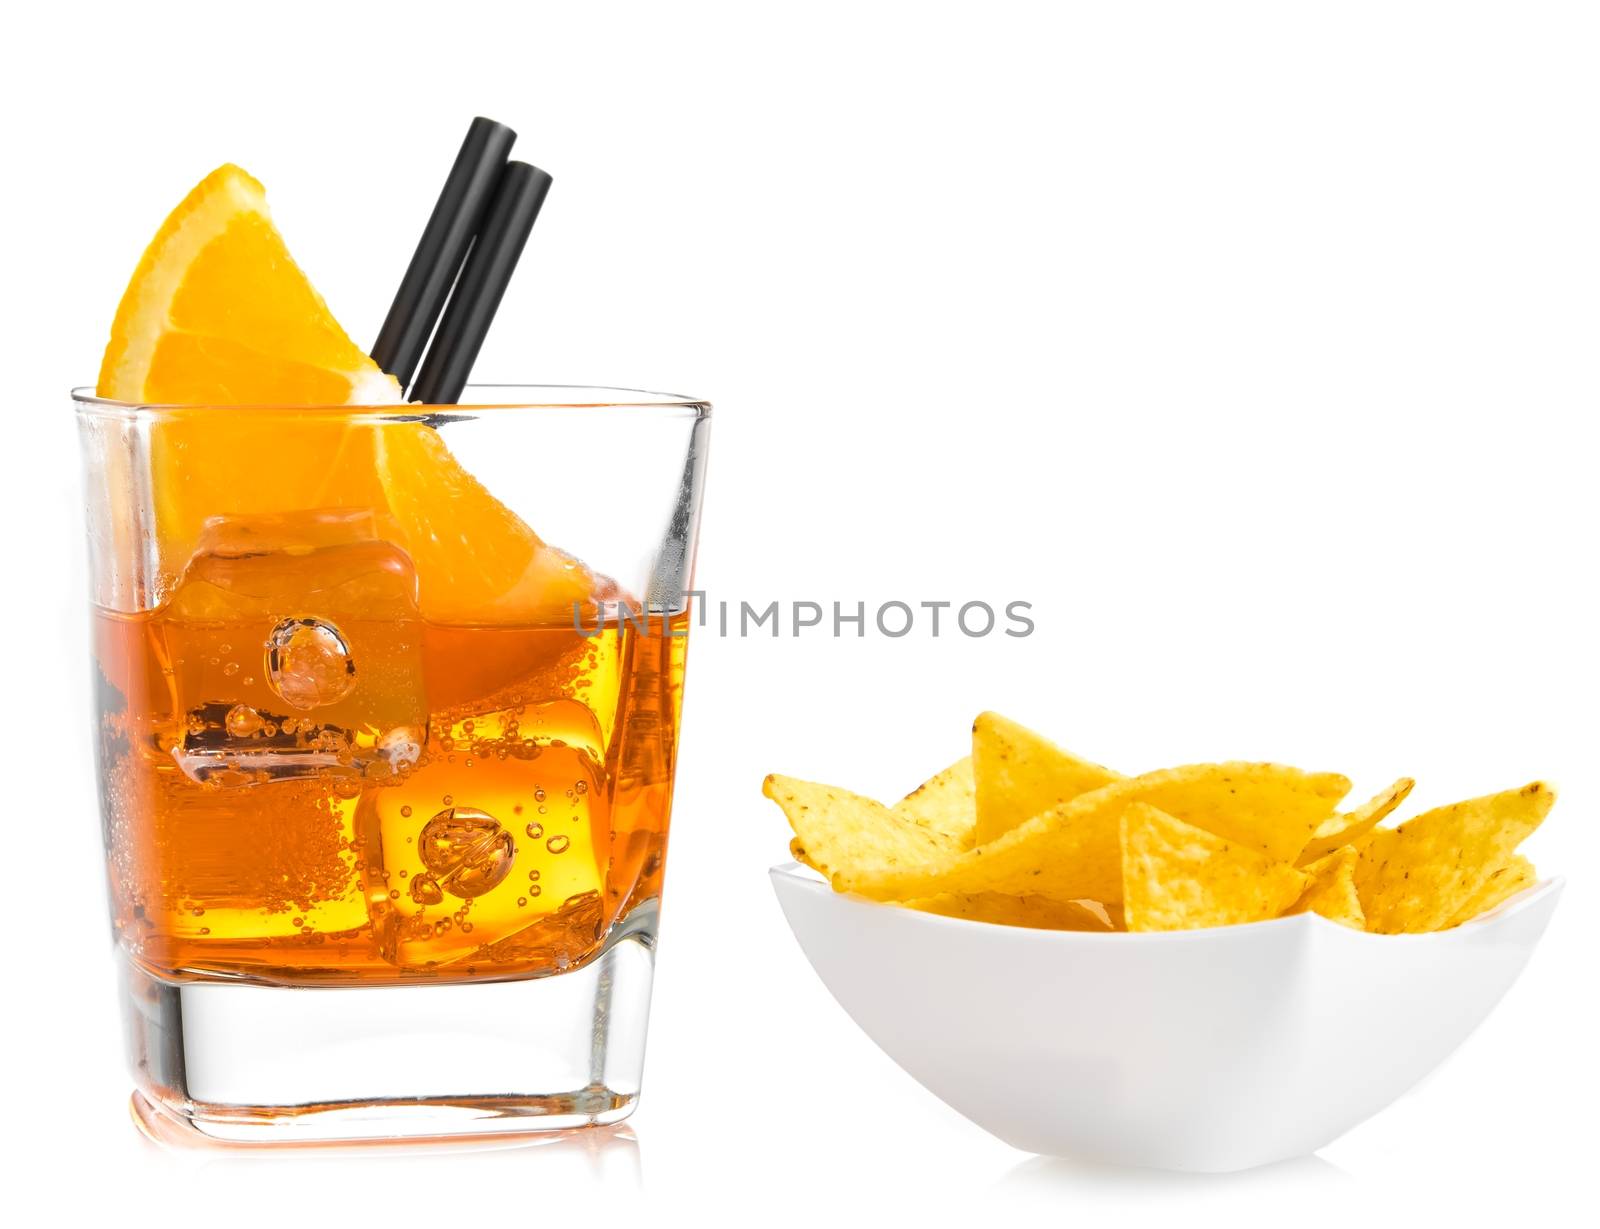 hot tacos chips in front of glass of spritz aperitif aperol cocktail with orange slices and ice cubes on white background